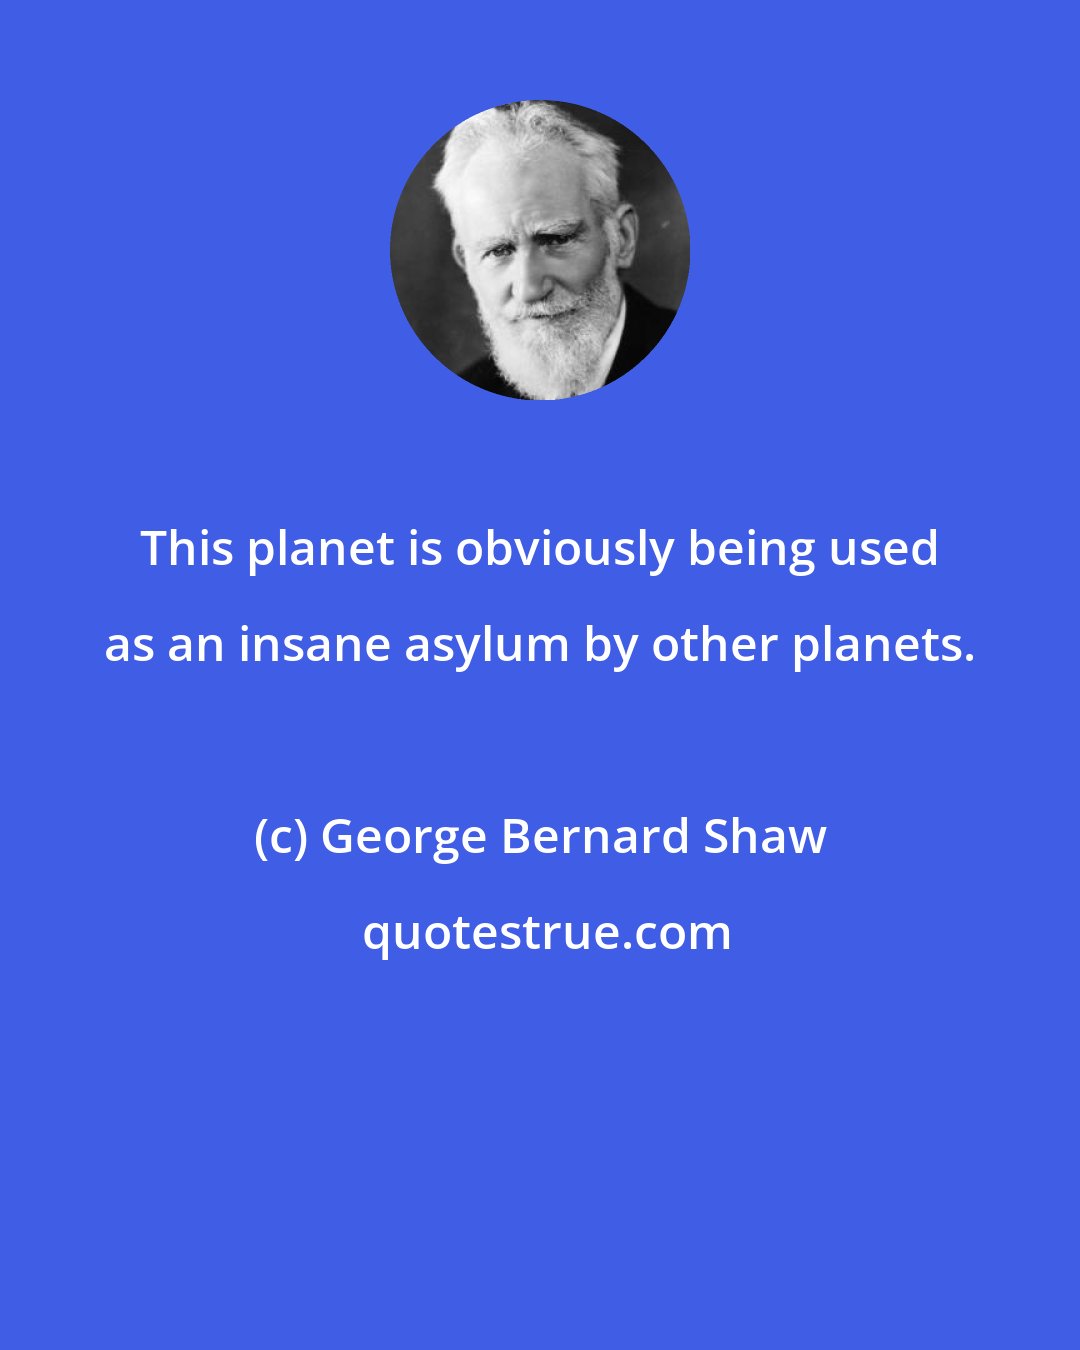 George Bernard Shaw: This planet is obviously being used as an insane asylum by other planets.